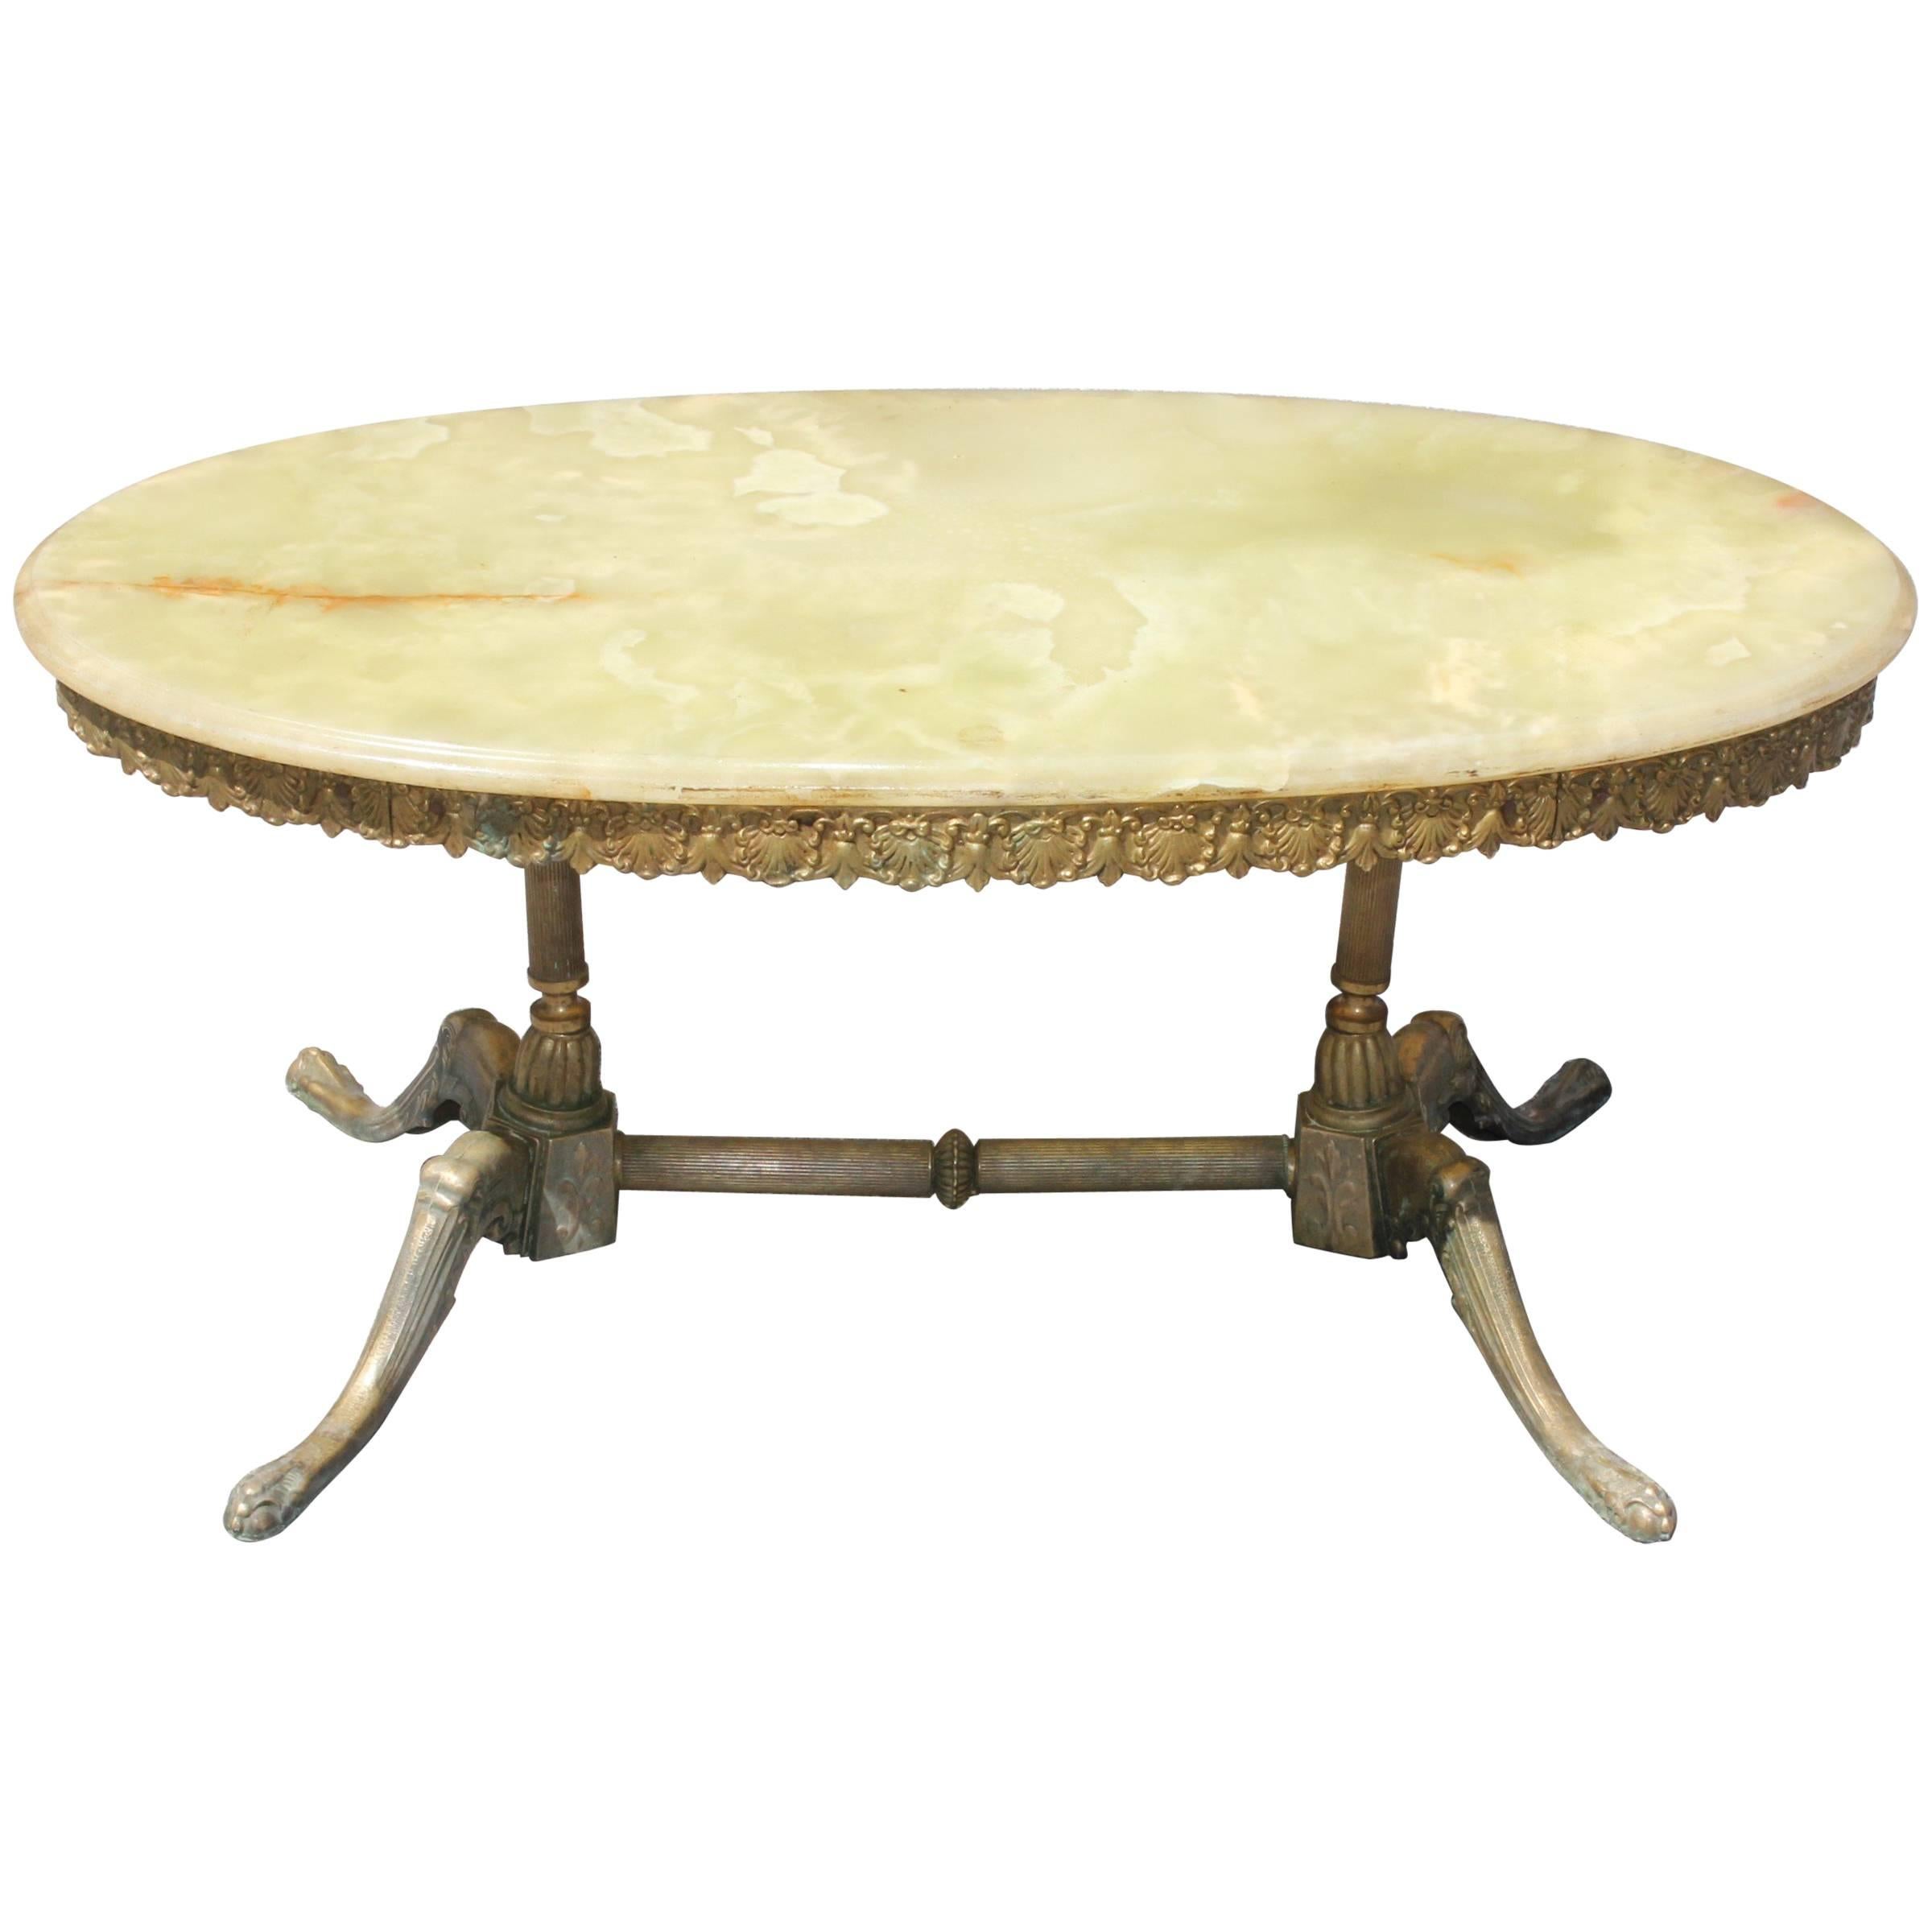 Classic French Maison Jansen Style Coffee or Cocktail Bronze Table, circa 1940s For Sale